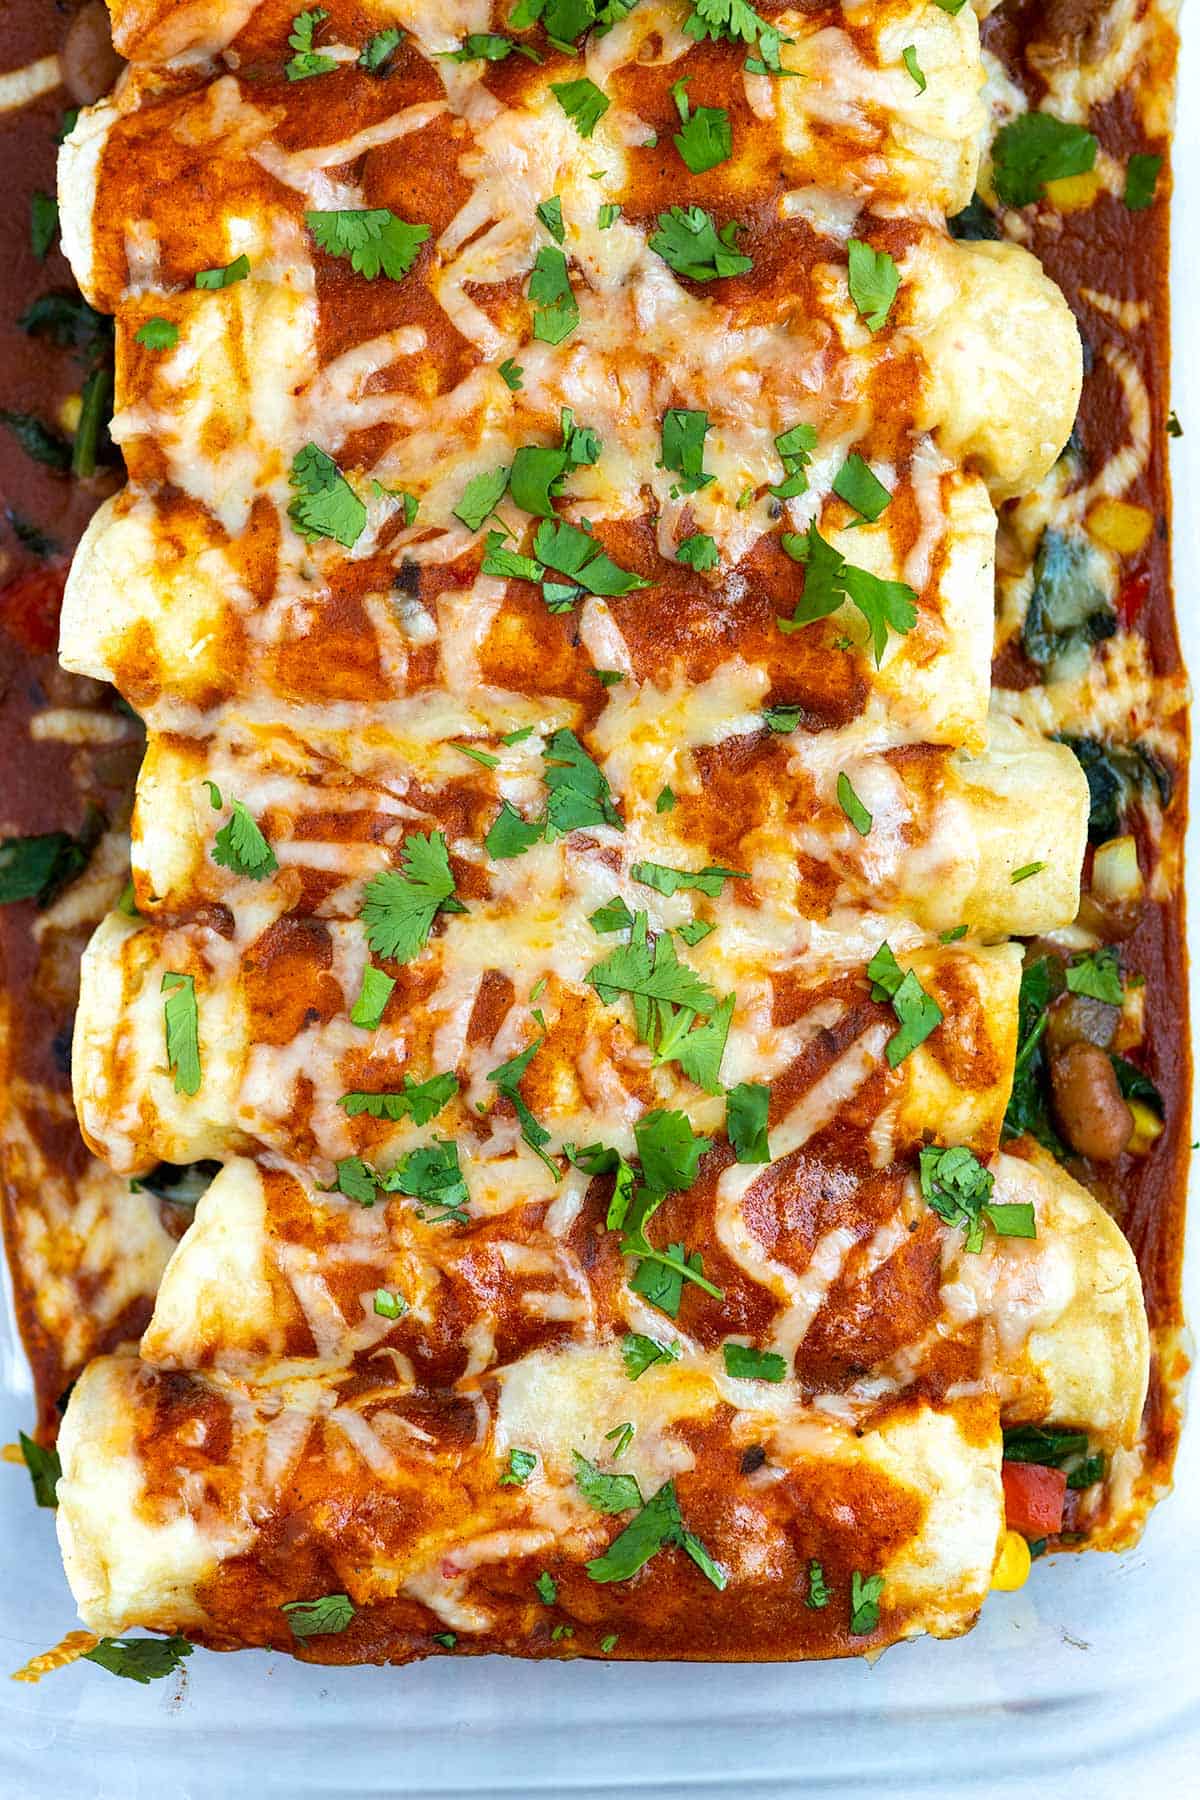 Veggie enchiladas rolled up and baked with cheese on top